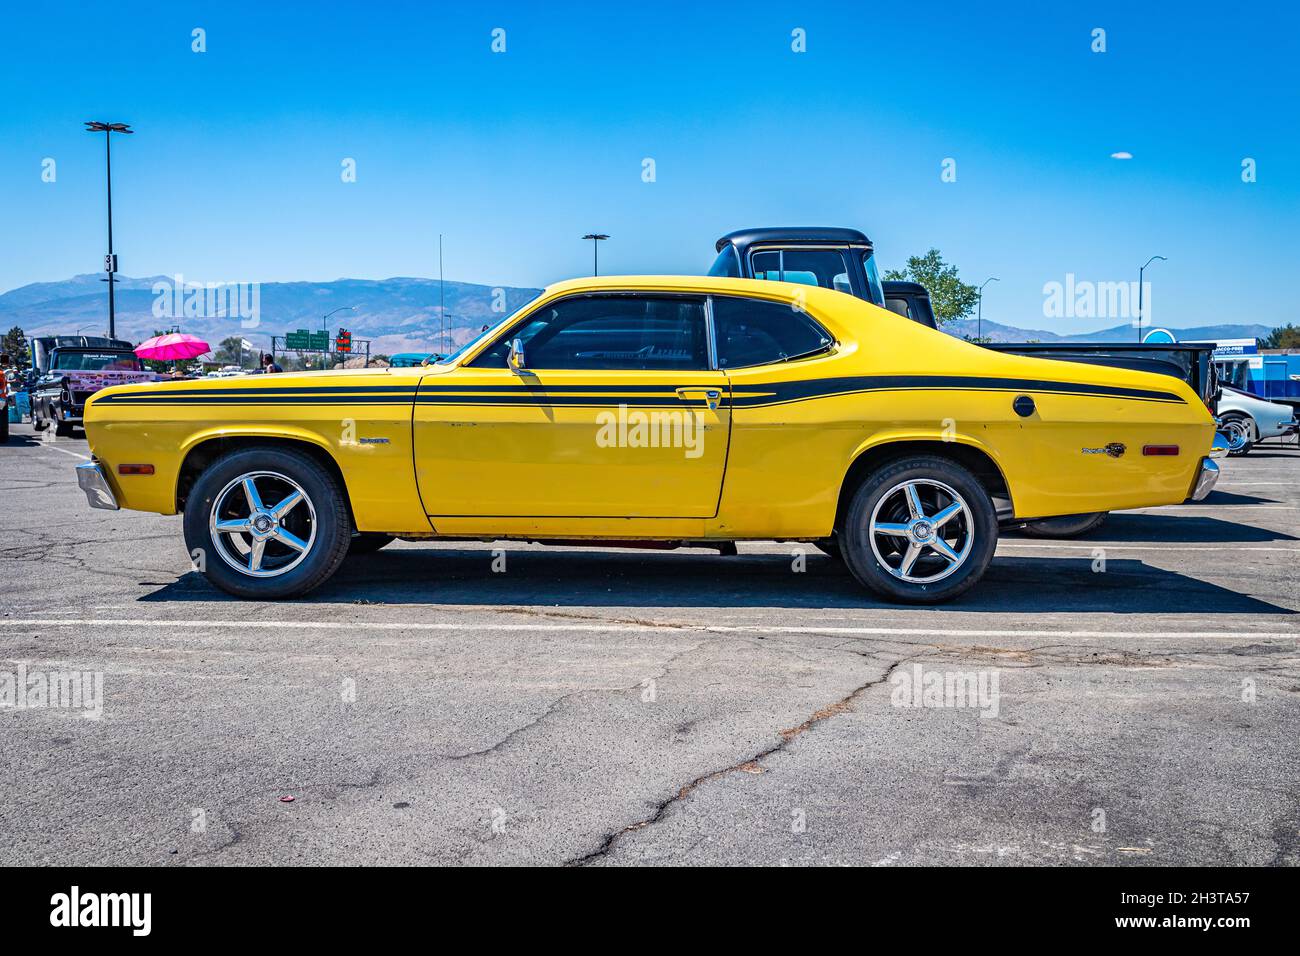 Reno, NV - August 4, 2021: 1973 Plymouth Duster Coupe at a local car show. Stock Photo